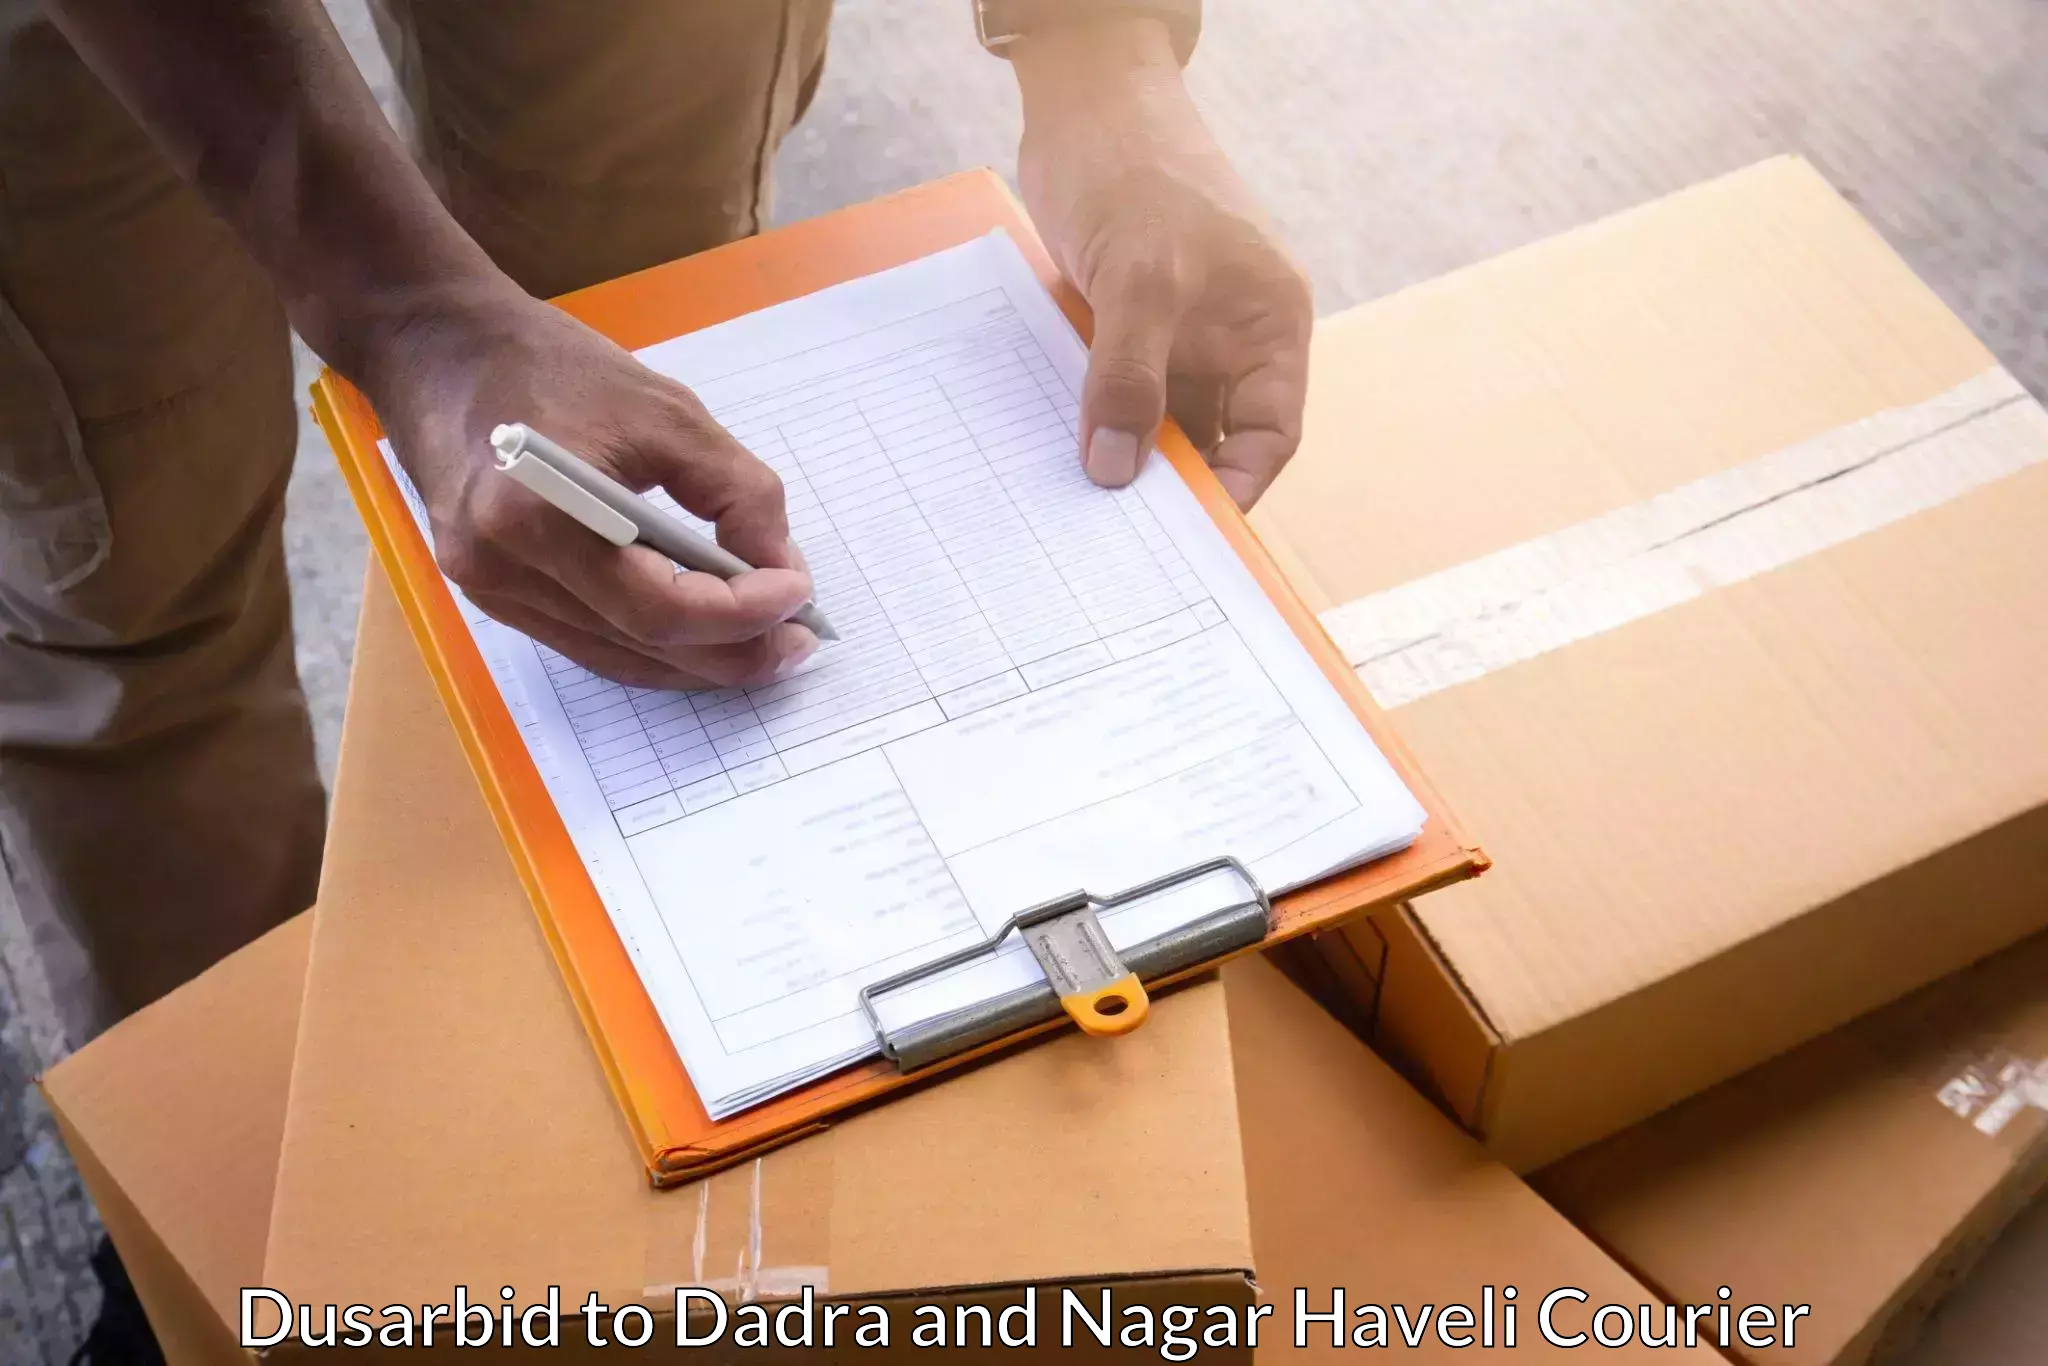 High value parcel delivery Dusarbid to Dadra and Nagar Haveli